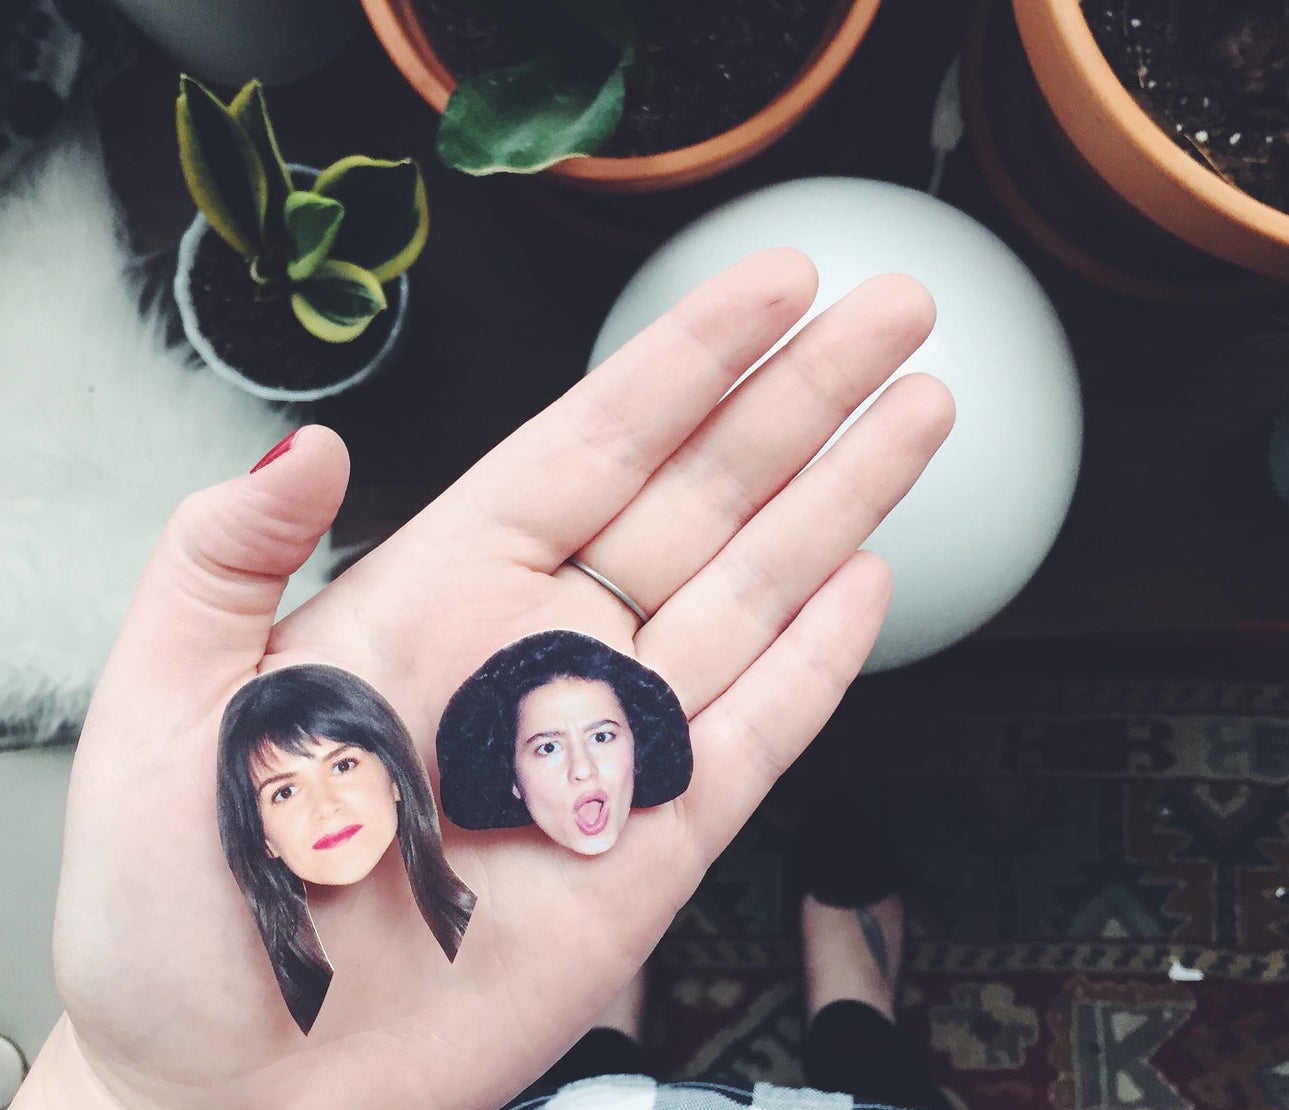 small magnets of ilana glaser and abbi jacobson&#x27;s faces in someone&#x27;s hand